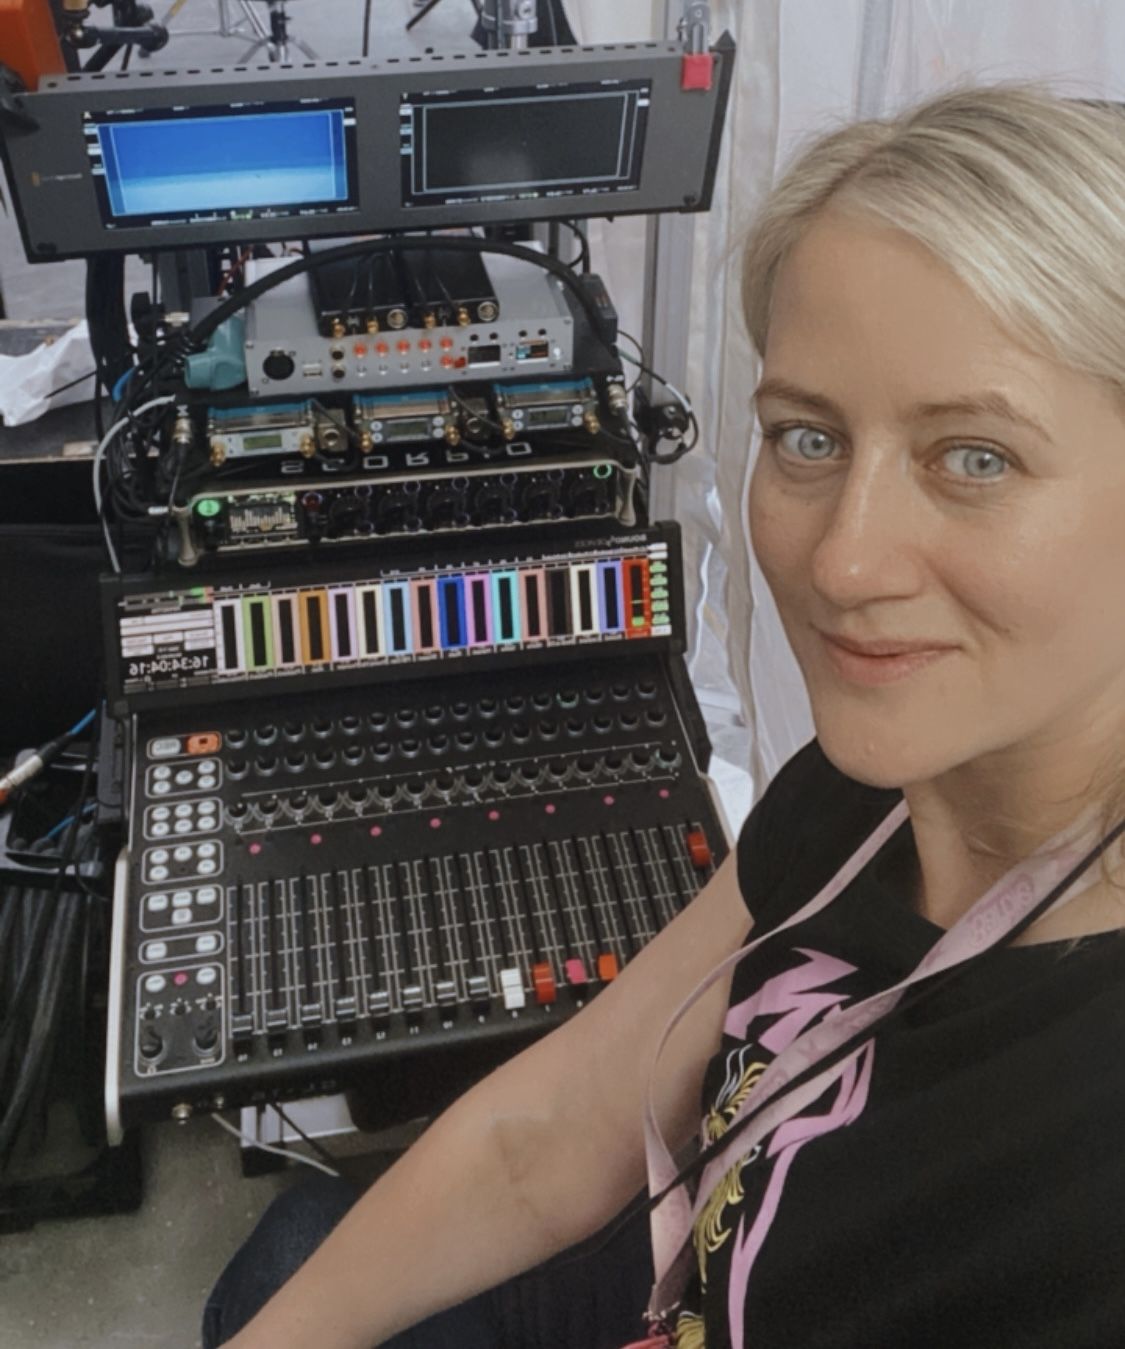 Nina Rice with the Sound Devices Scorpio and CL-16